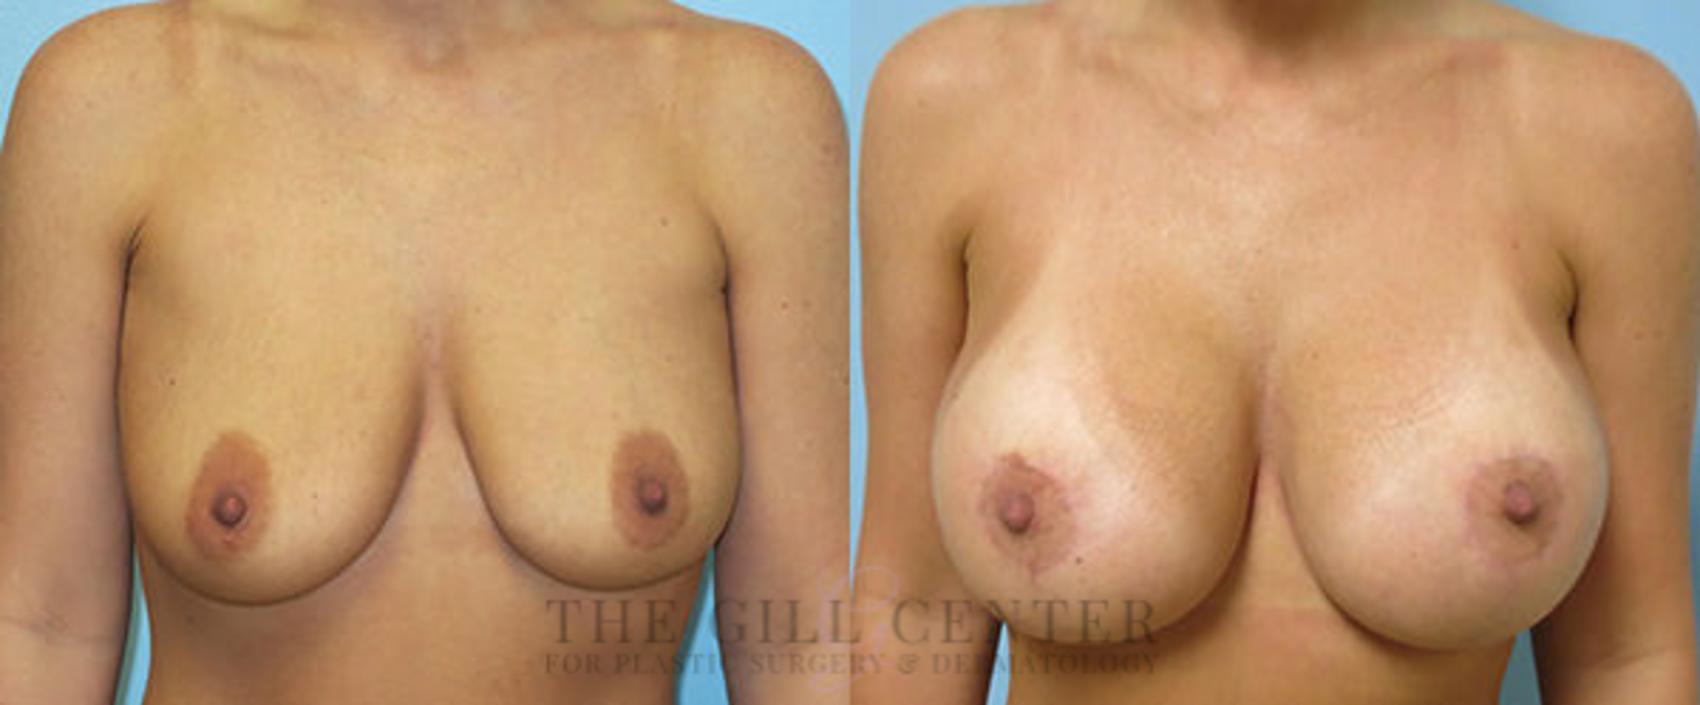 Breast Lift with Implants Case 103 Before & After Front | The Woodlands, TX | The Gill Center for Plastic Surgery and Dermatology